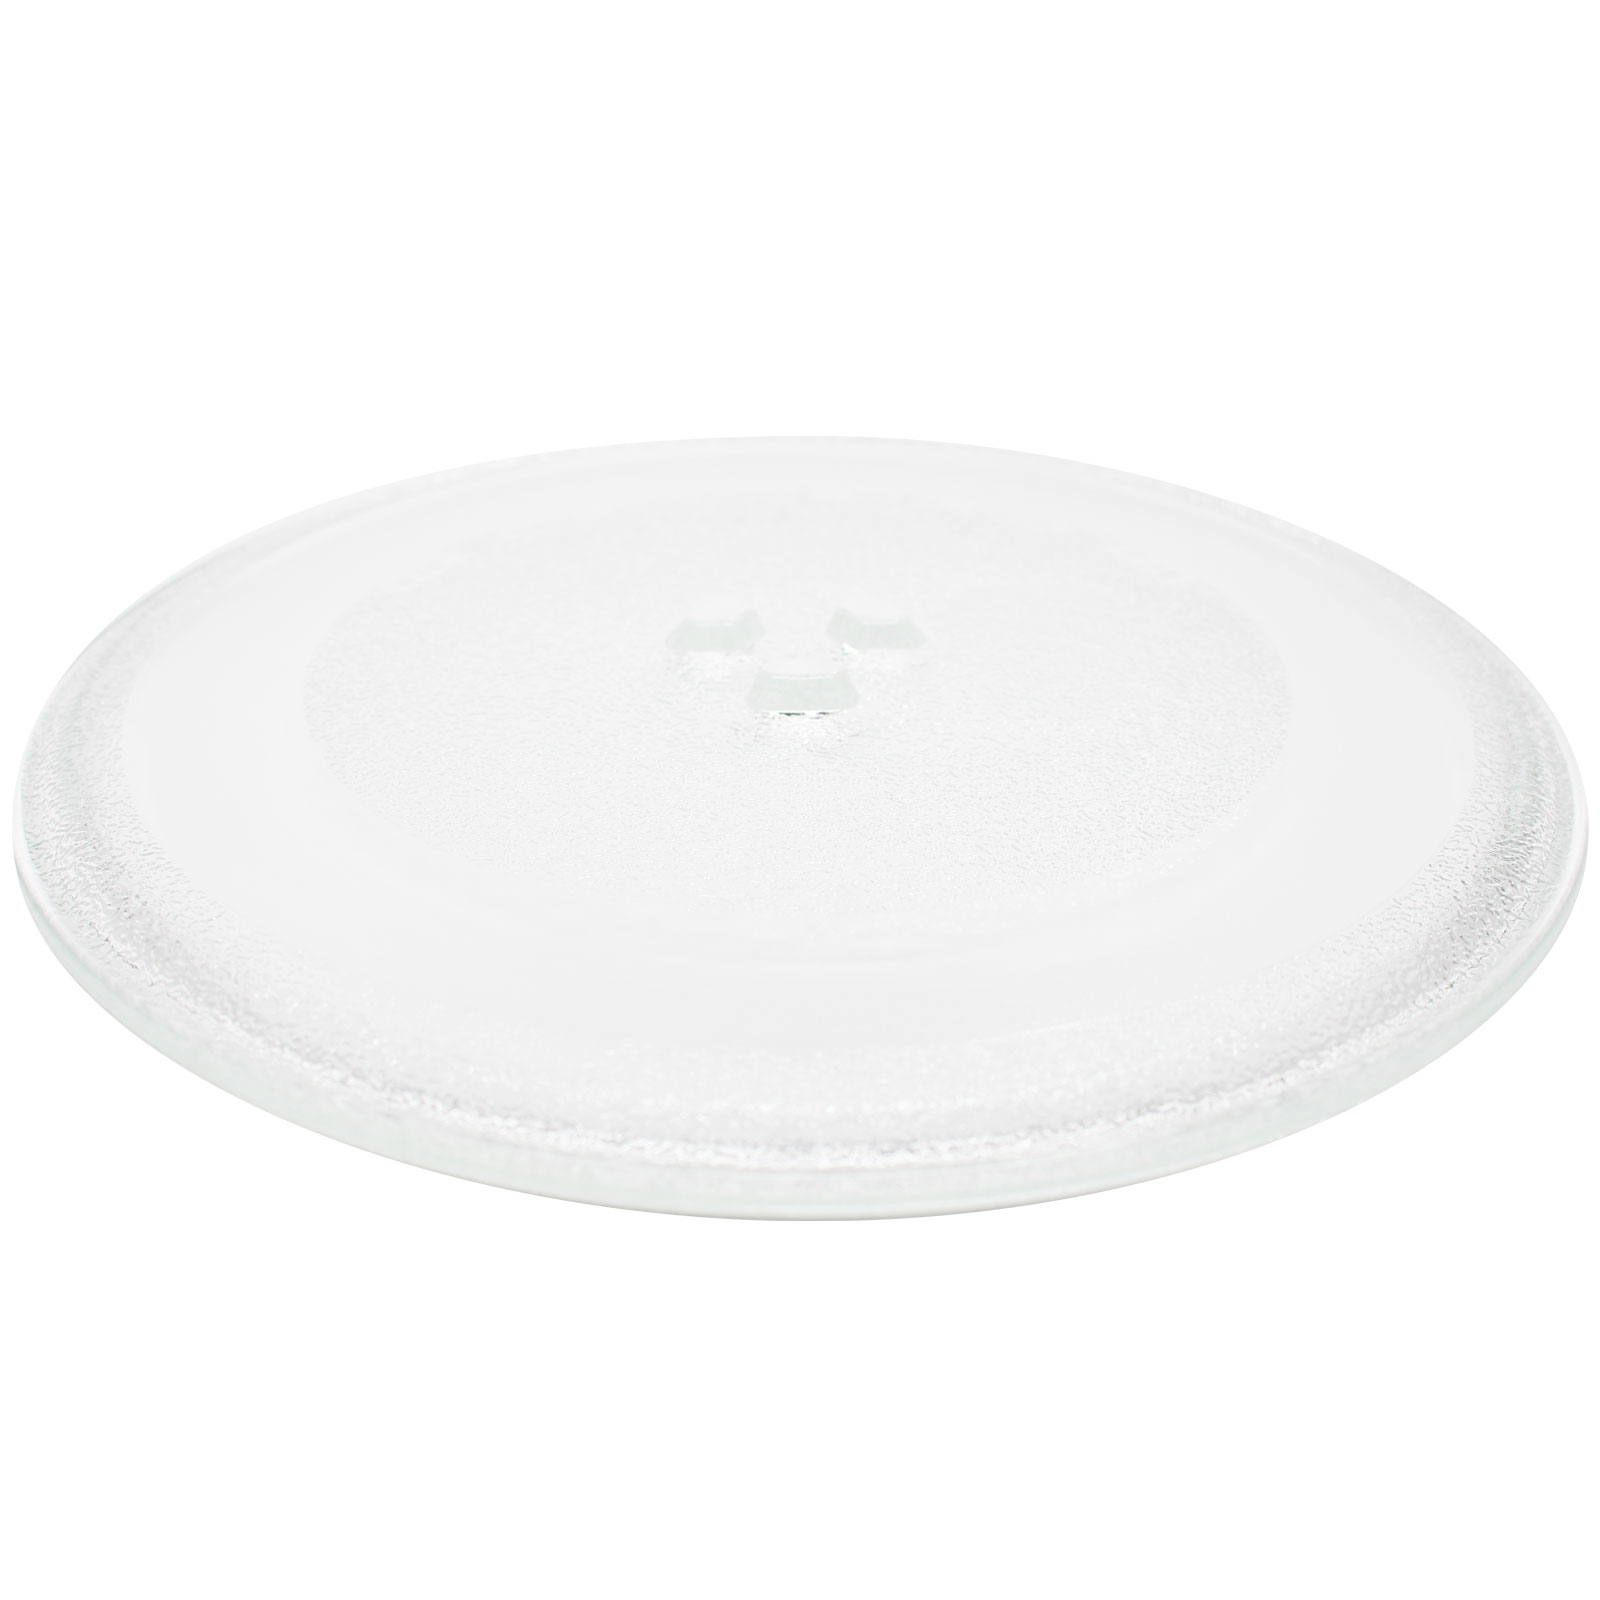 UpStart Components Replacement Oster 203600 Microwave Glass Plate  - Compatible Oster 203600 Microwave Glass Turntable Tray - 10" (255mm)